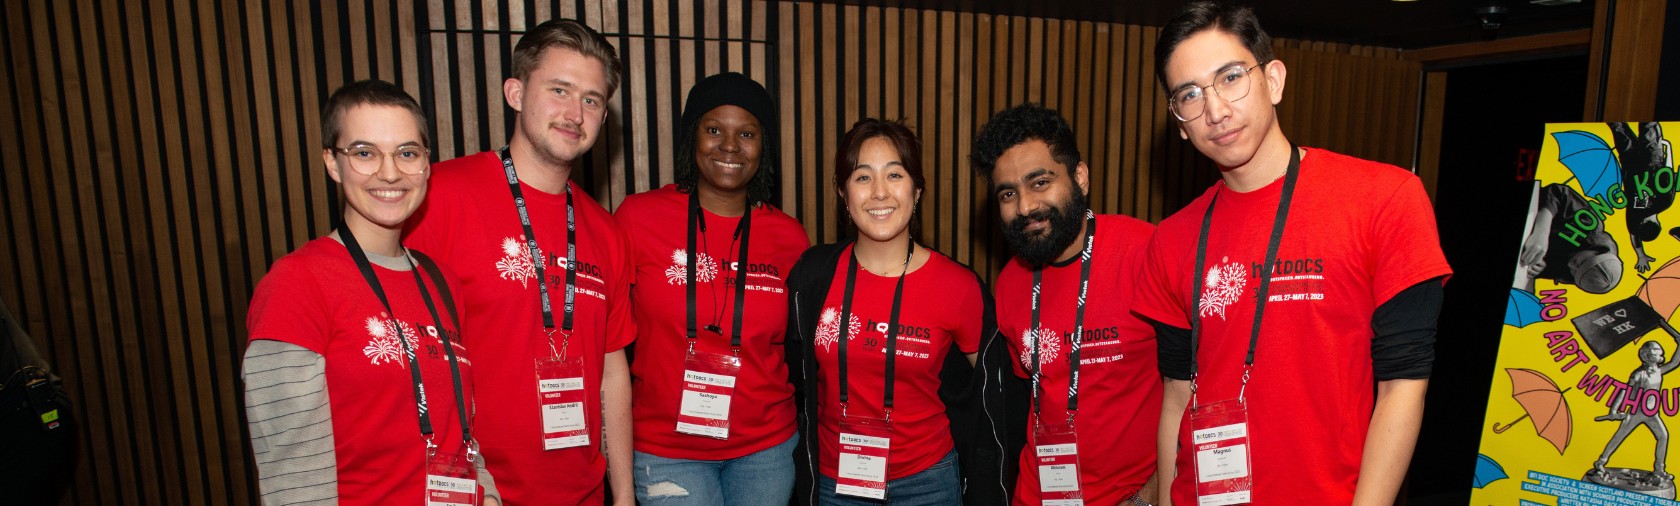 Group of volunteers in Hot Docs Festival shirts